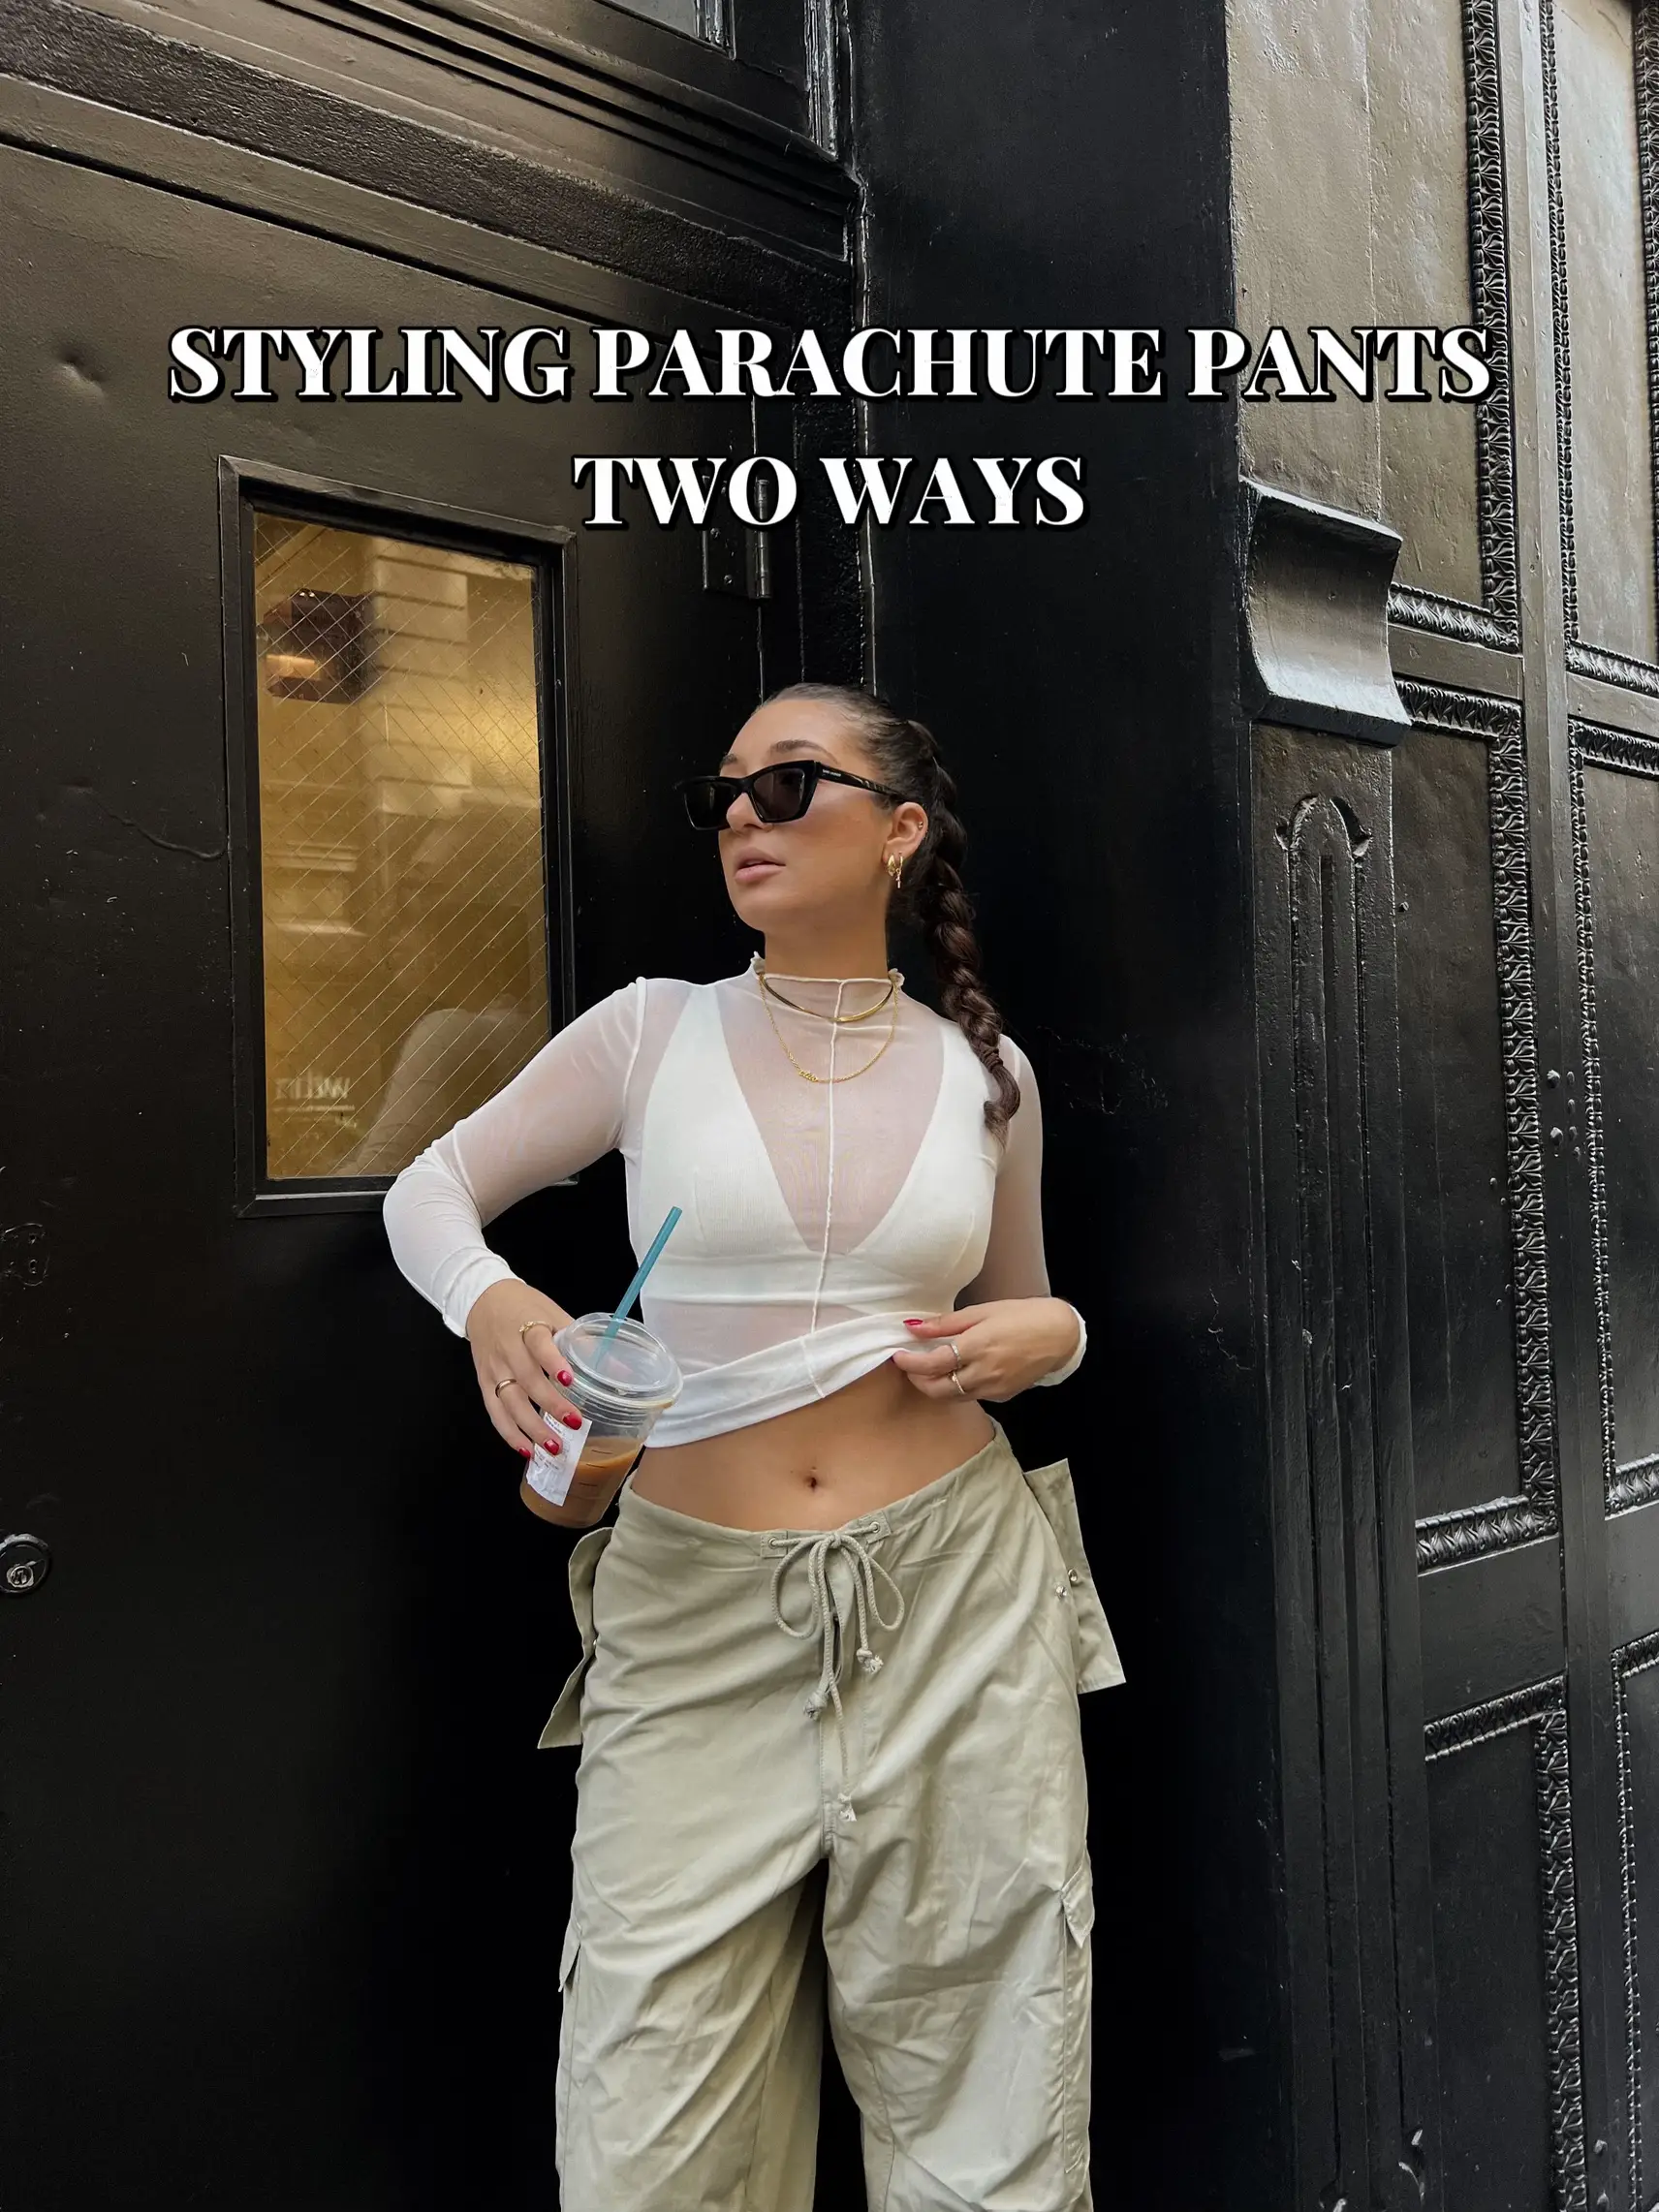 STYLING PARACHUTE PANTS TWO WAYS, Gallery posted by Sstephkoutss